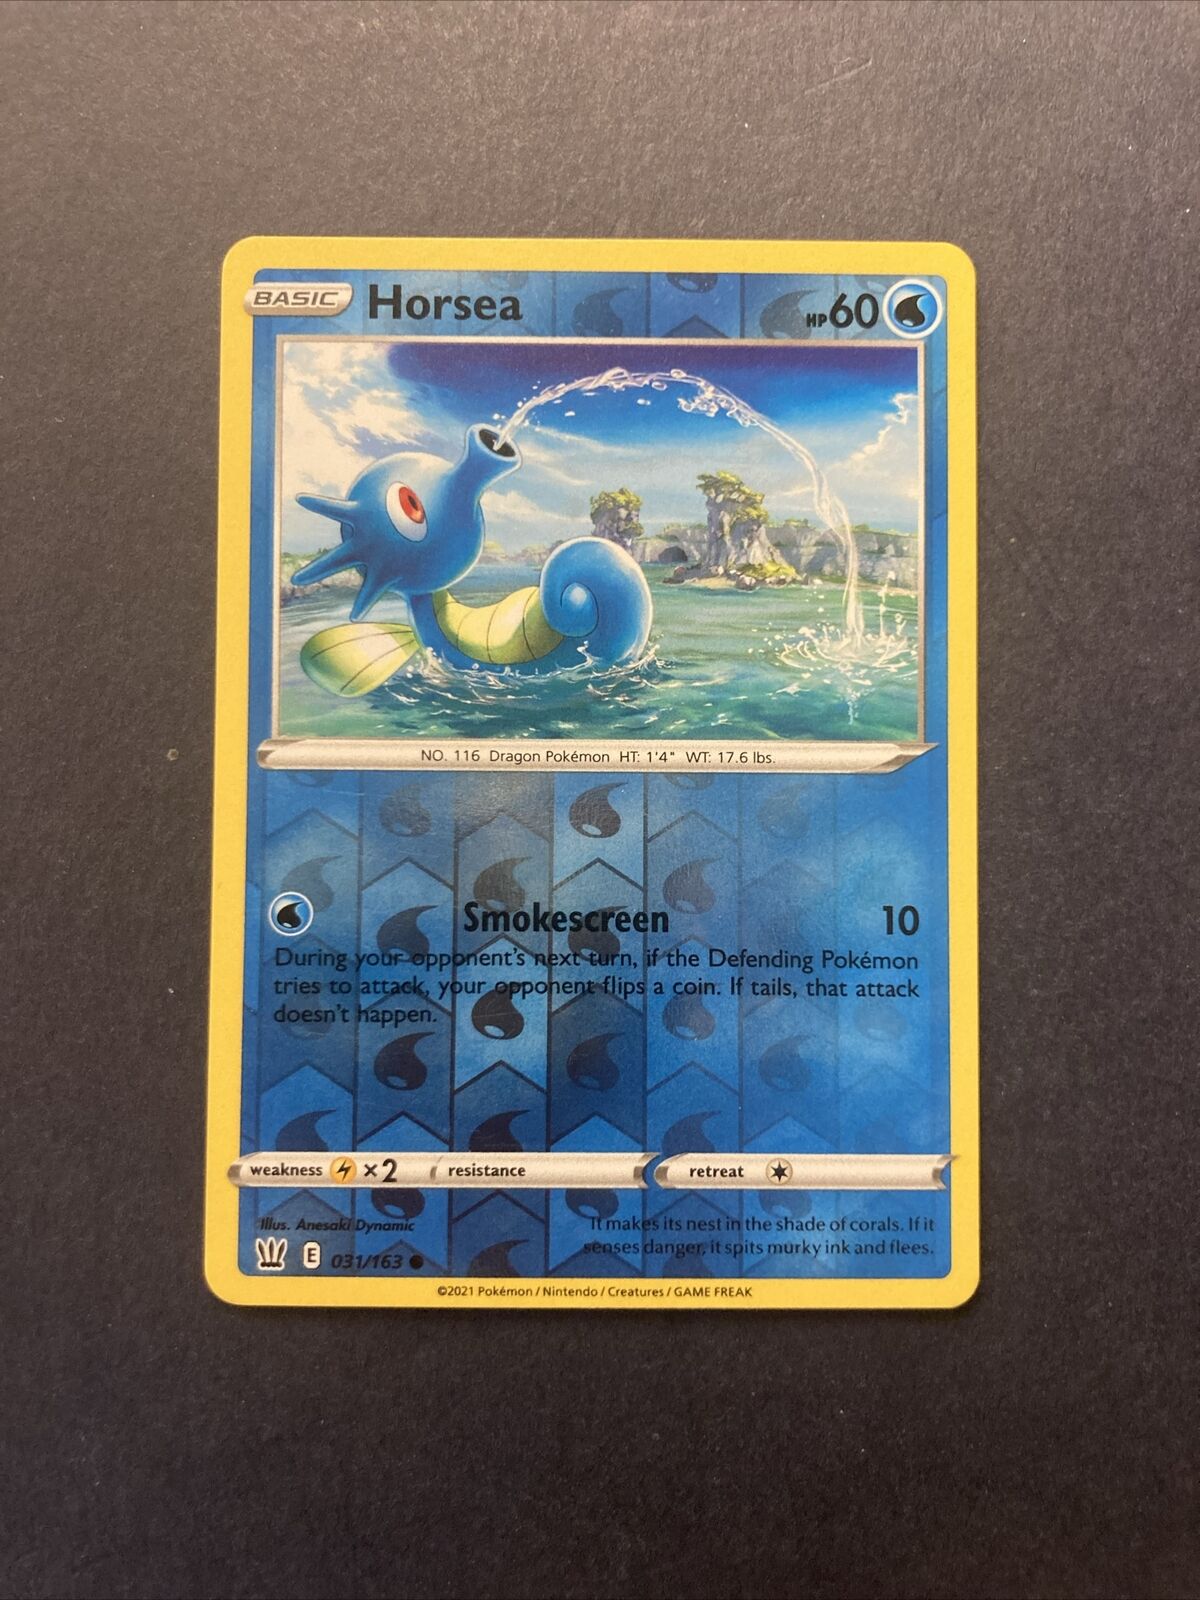 Horsea 031/163 Common Reverse Holo Water Type Pokémon Card NM/Mint Condition